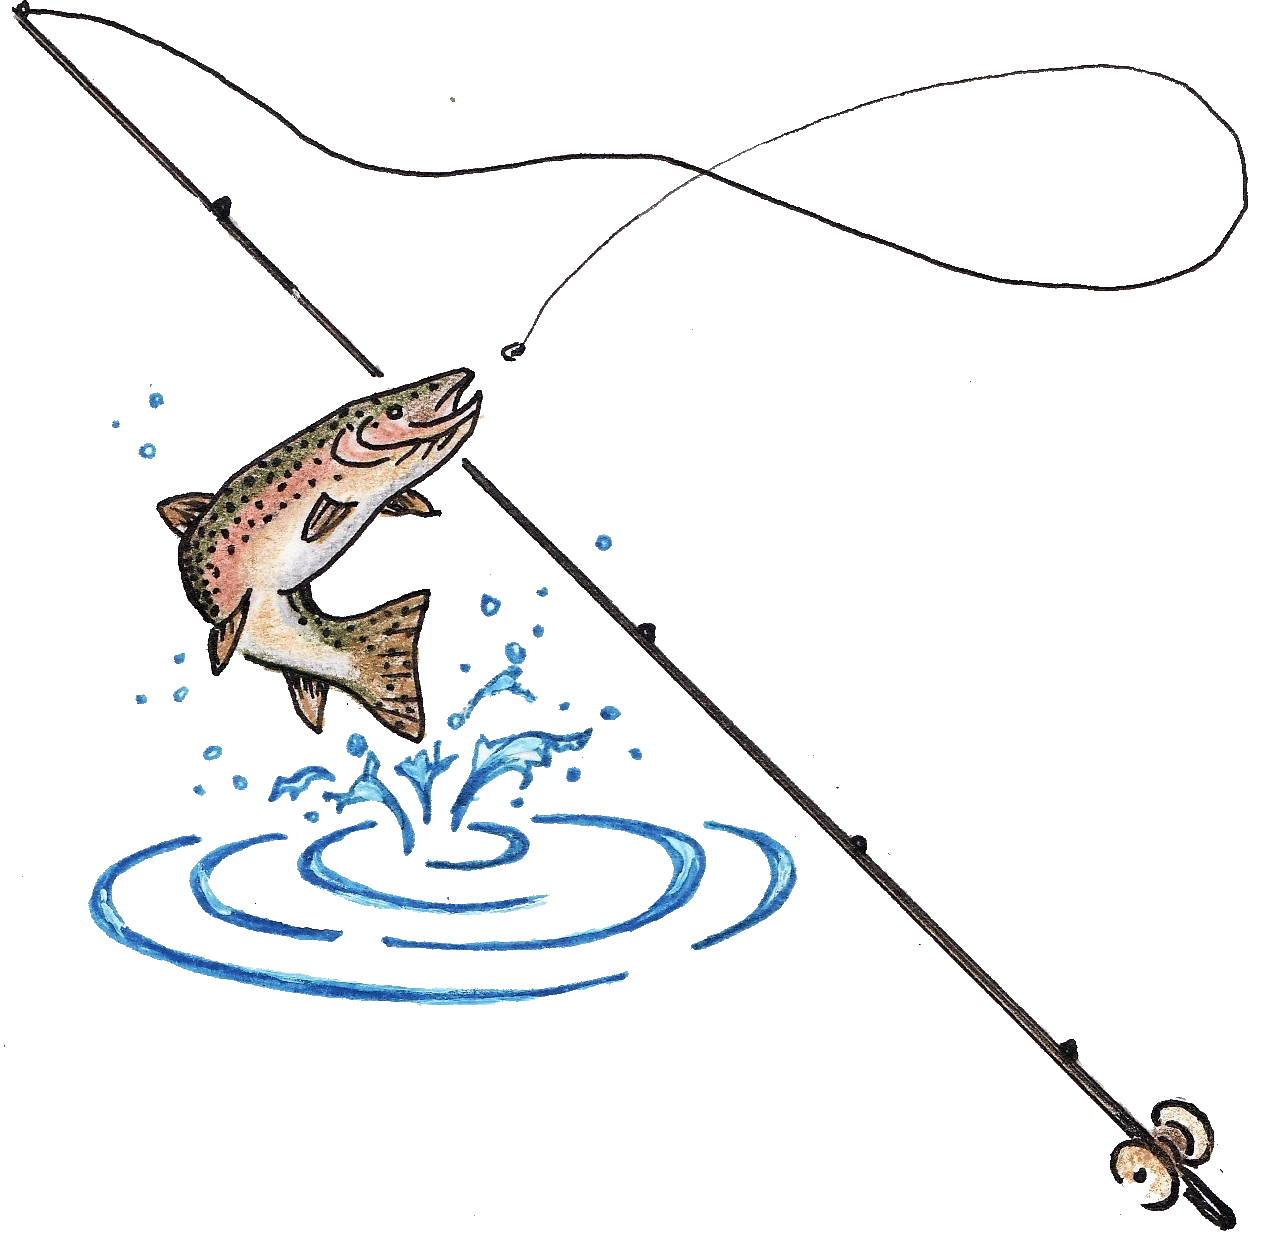 Images about lures and. Fishing clipart fishing pole